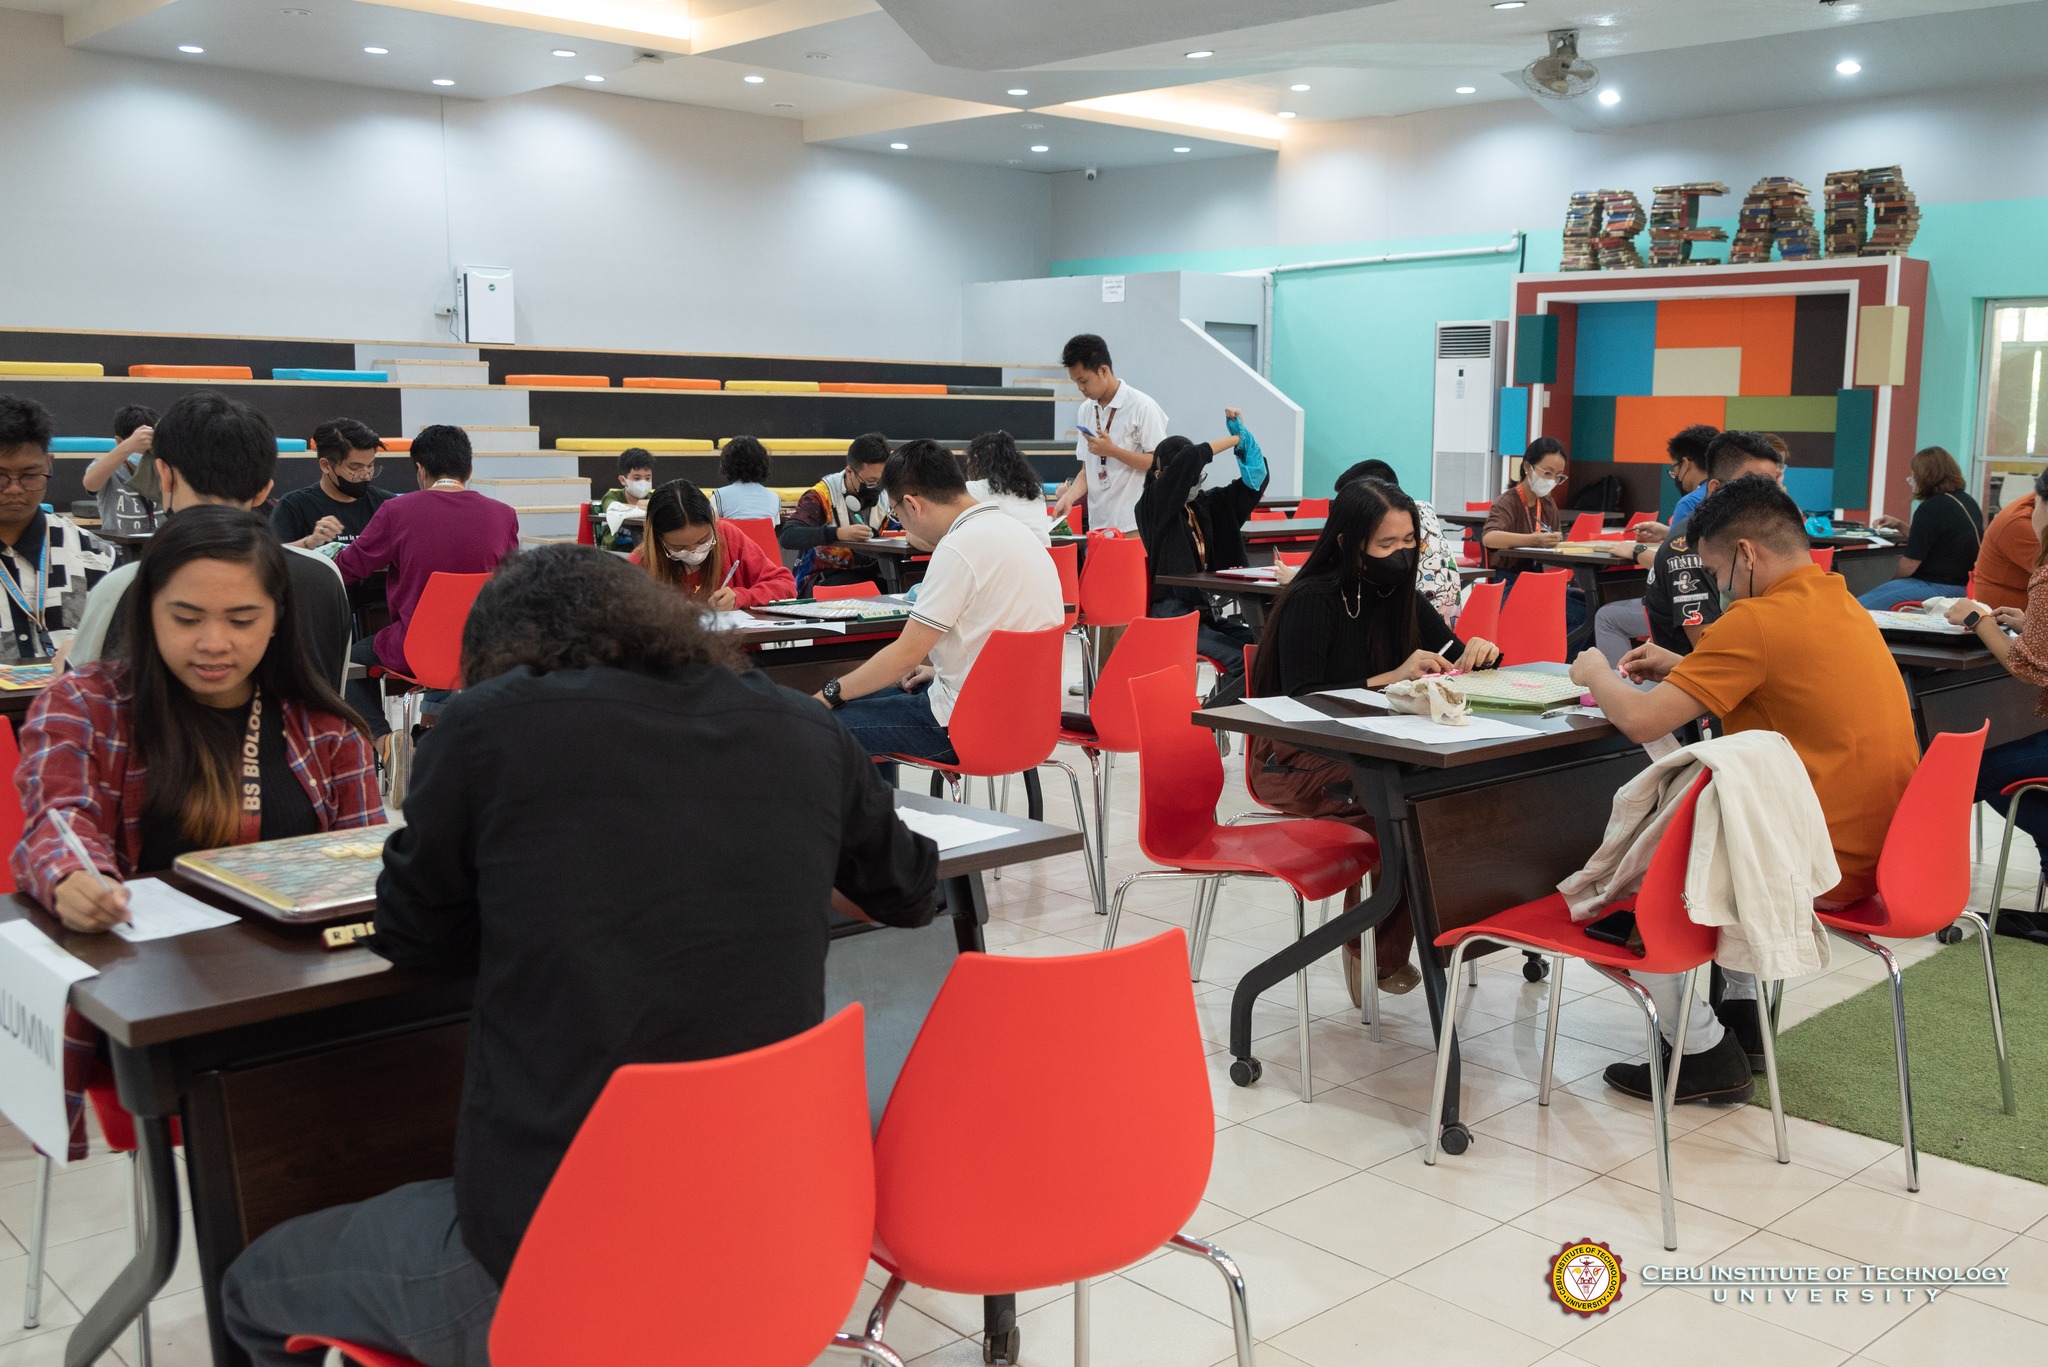 When not used as a place of study, the activity center is also an avenue for different learning opportunities for studies, such as this Scrabble tournament among students and alumni.